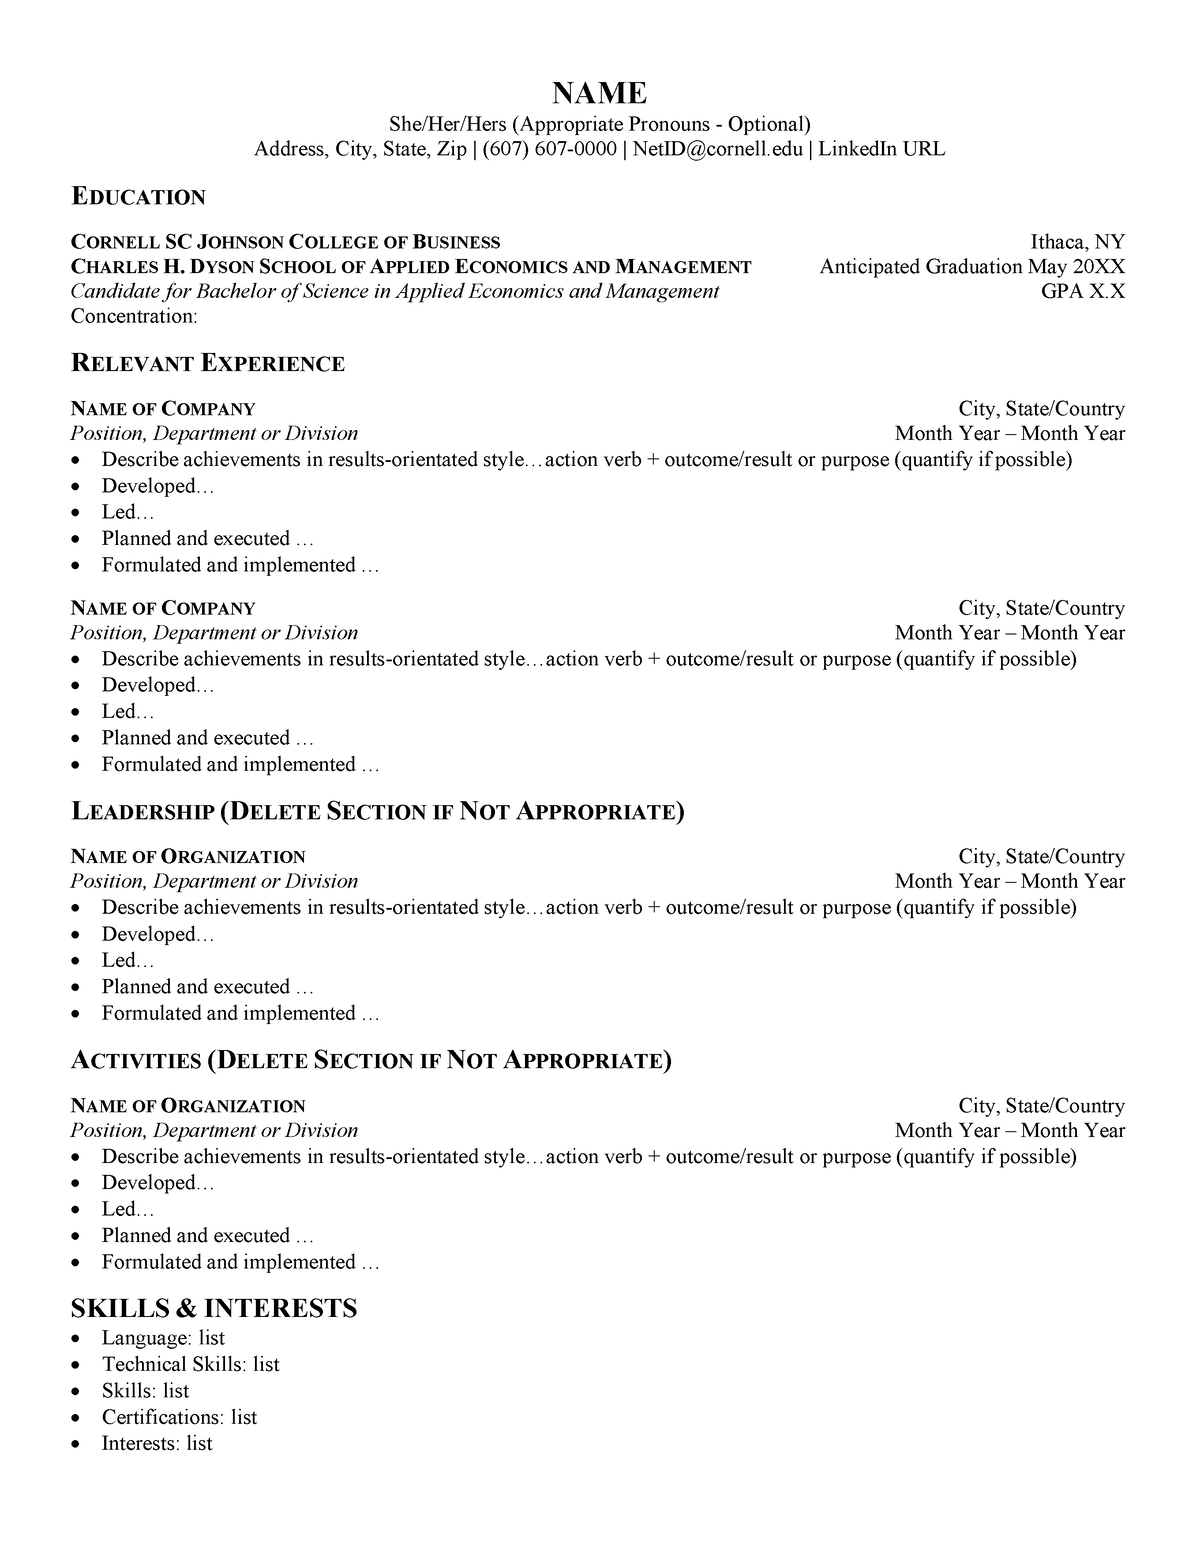 Dyson Resume Template NAME She/Her/Hers (Appropriate Pronouns